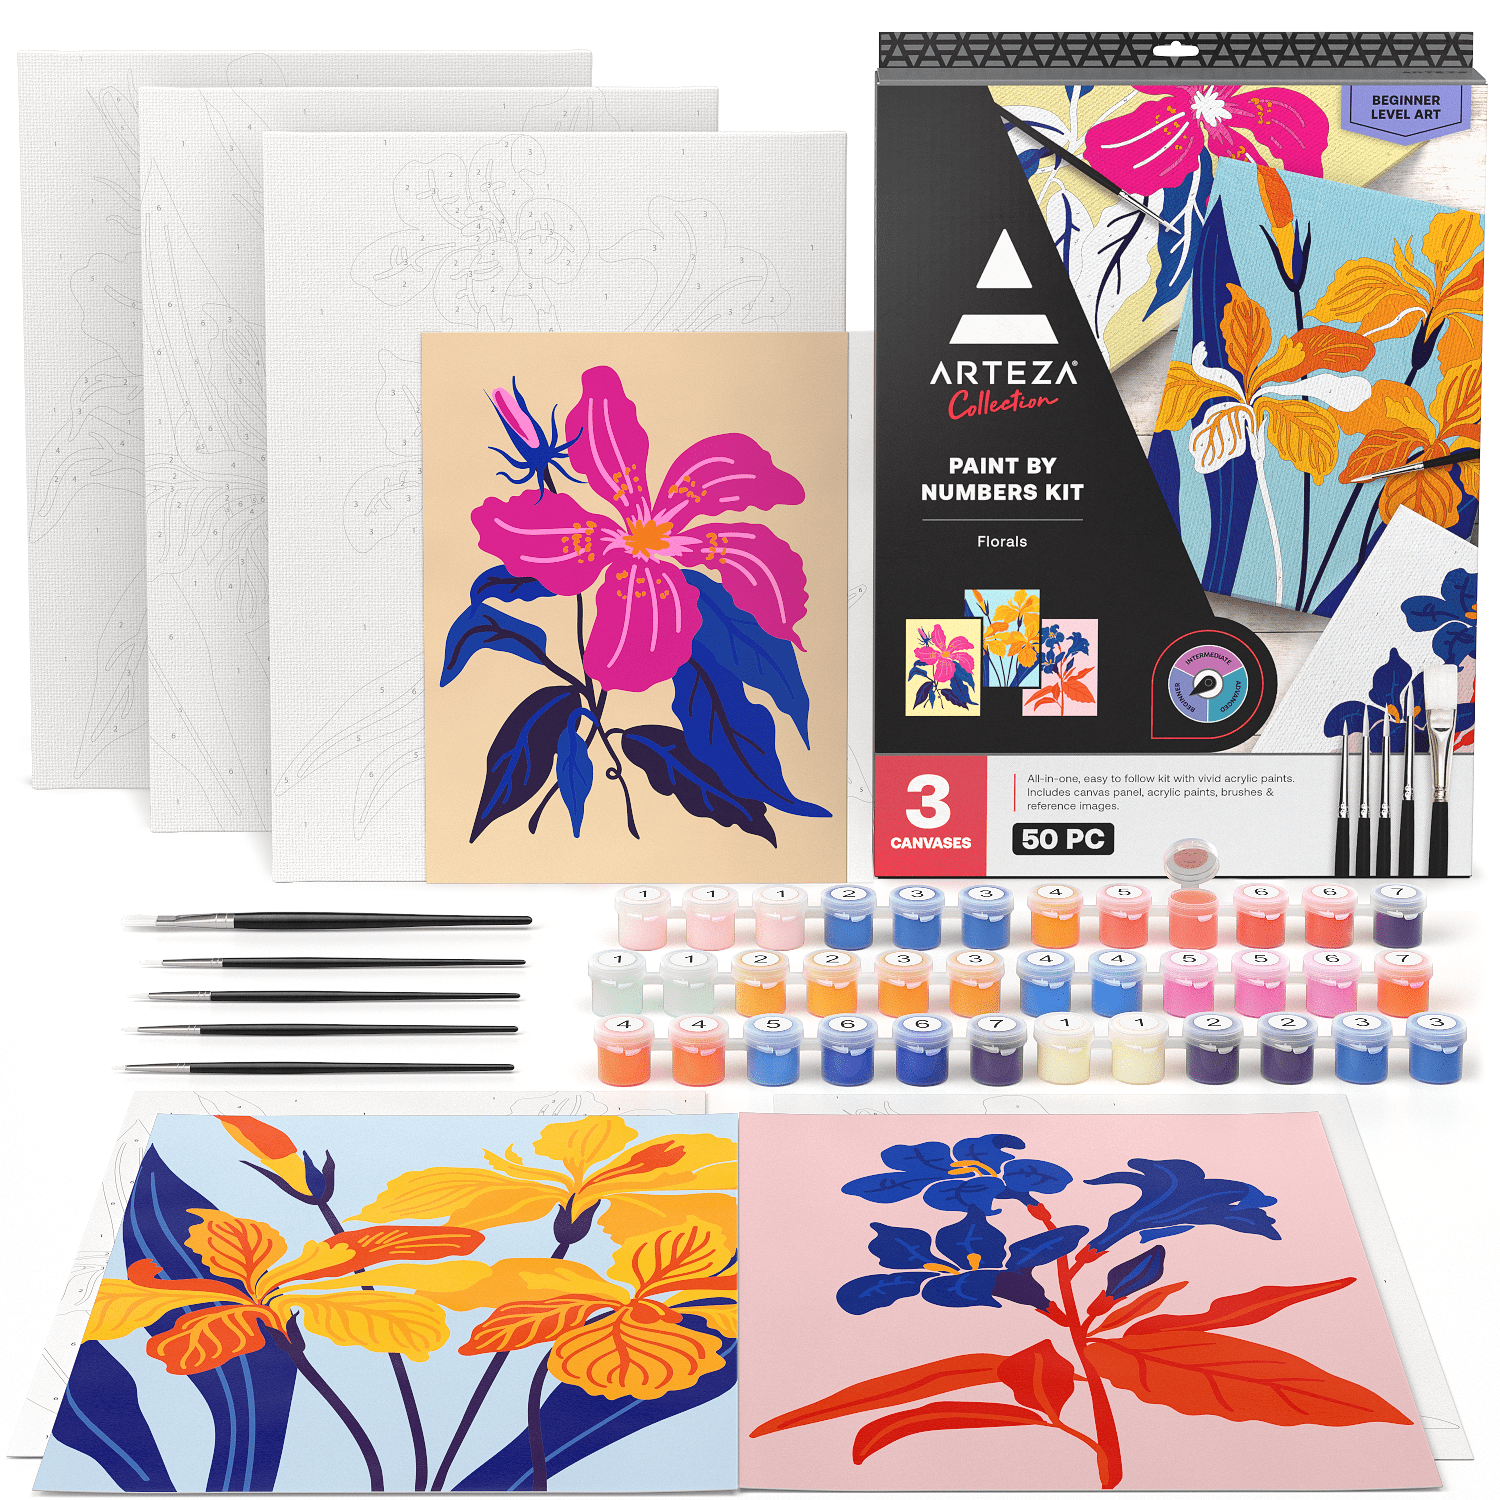 DIY Paint by Numbers for Adults Beginner, Adult Paint by Number Kits on Canvas Number Painting for Adults Star Wars Acrylic Painting Kit, Easy Paint